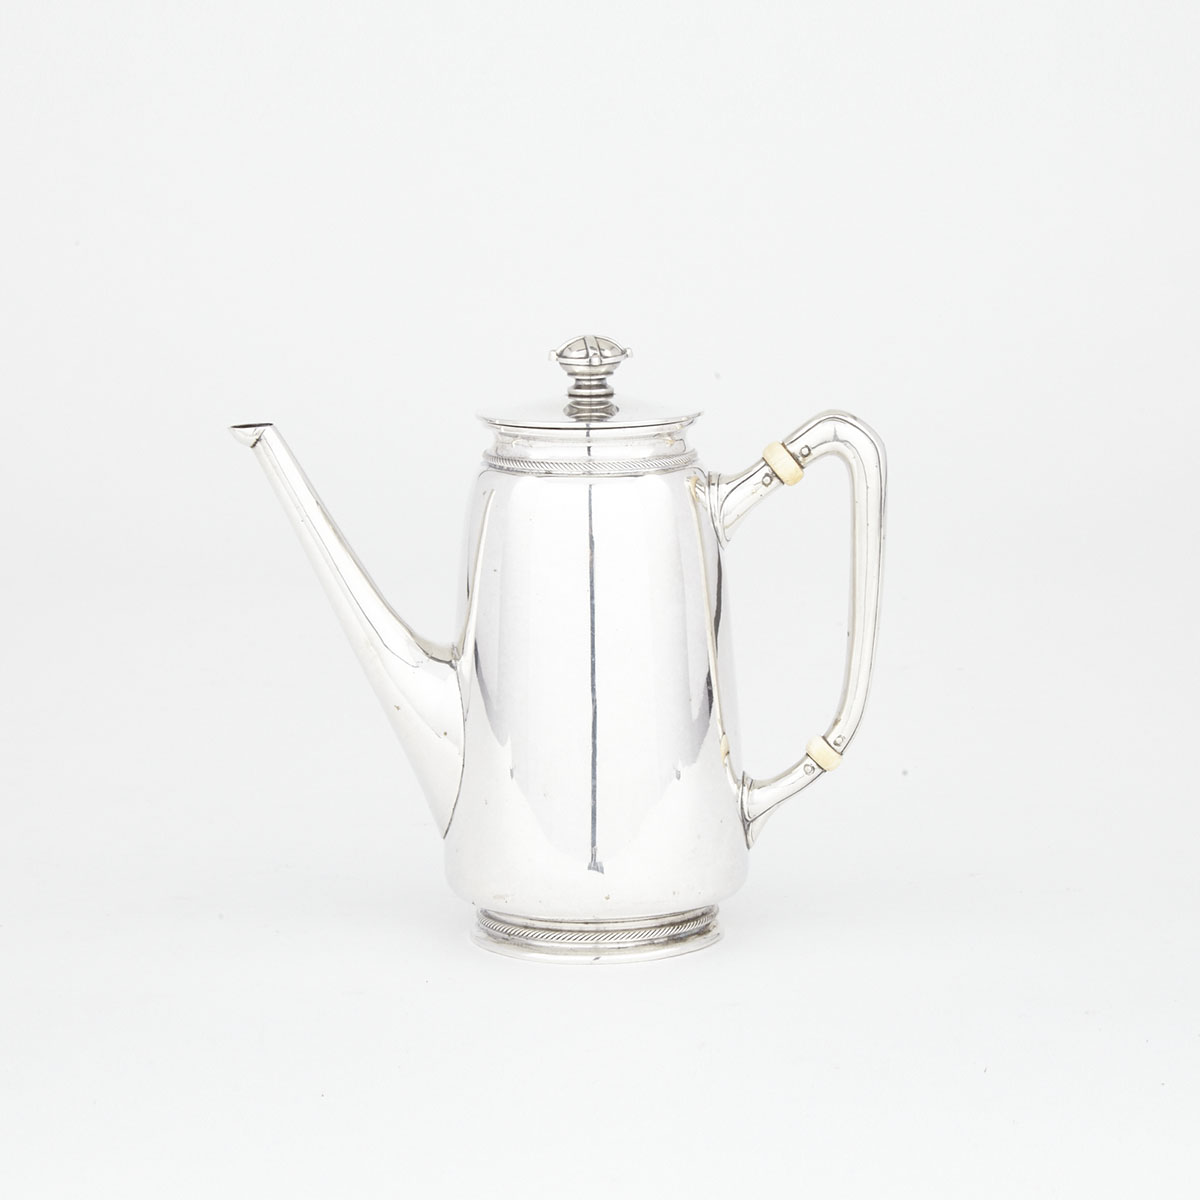 Hungarian Silver Coffee Pot, early 20th century